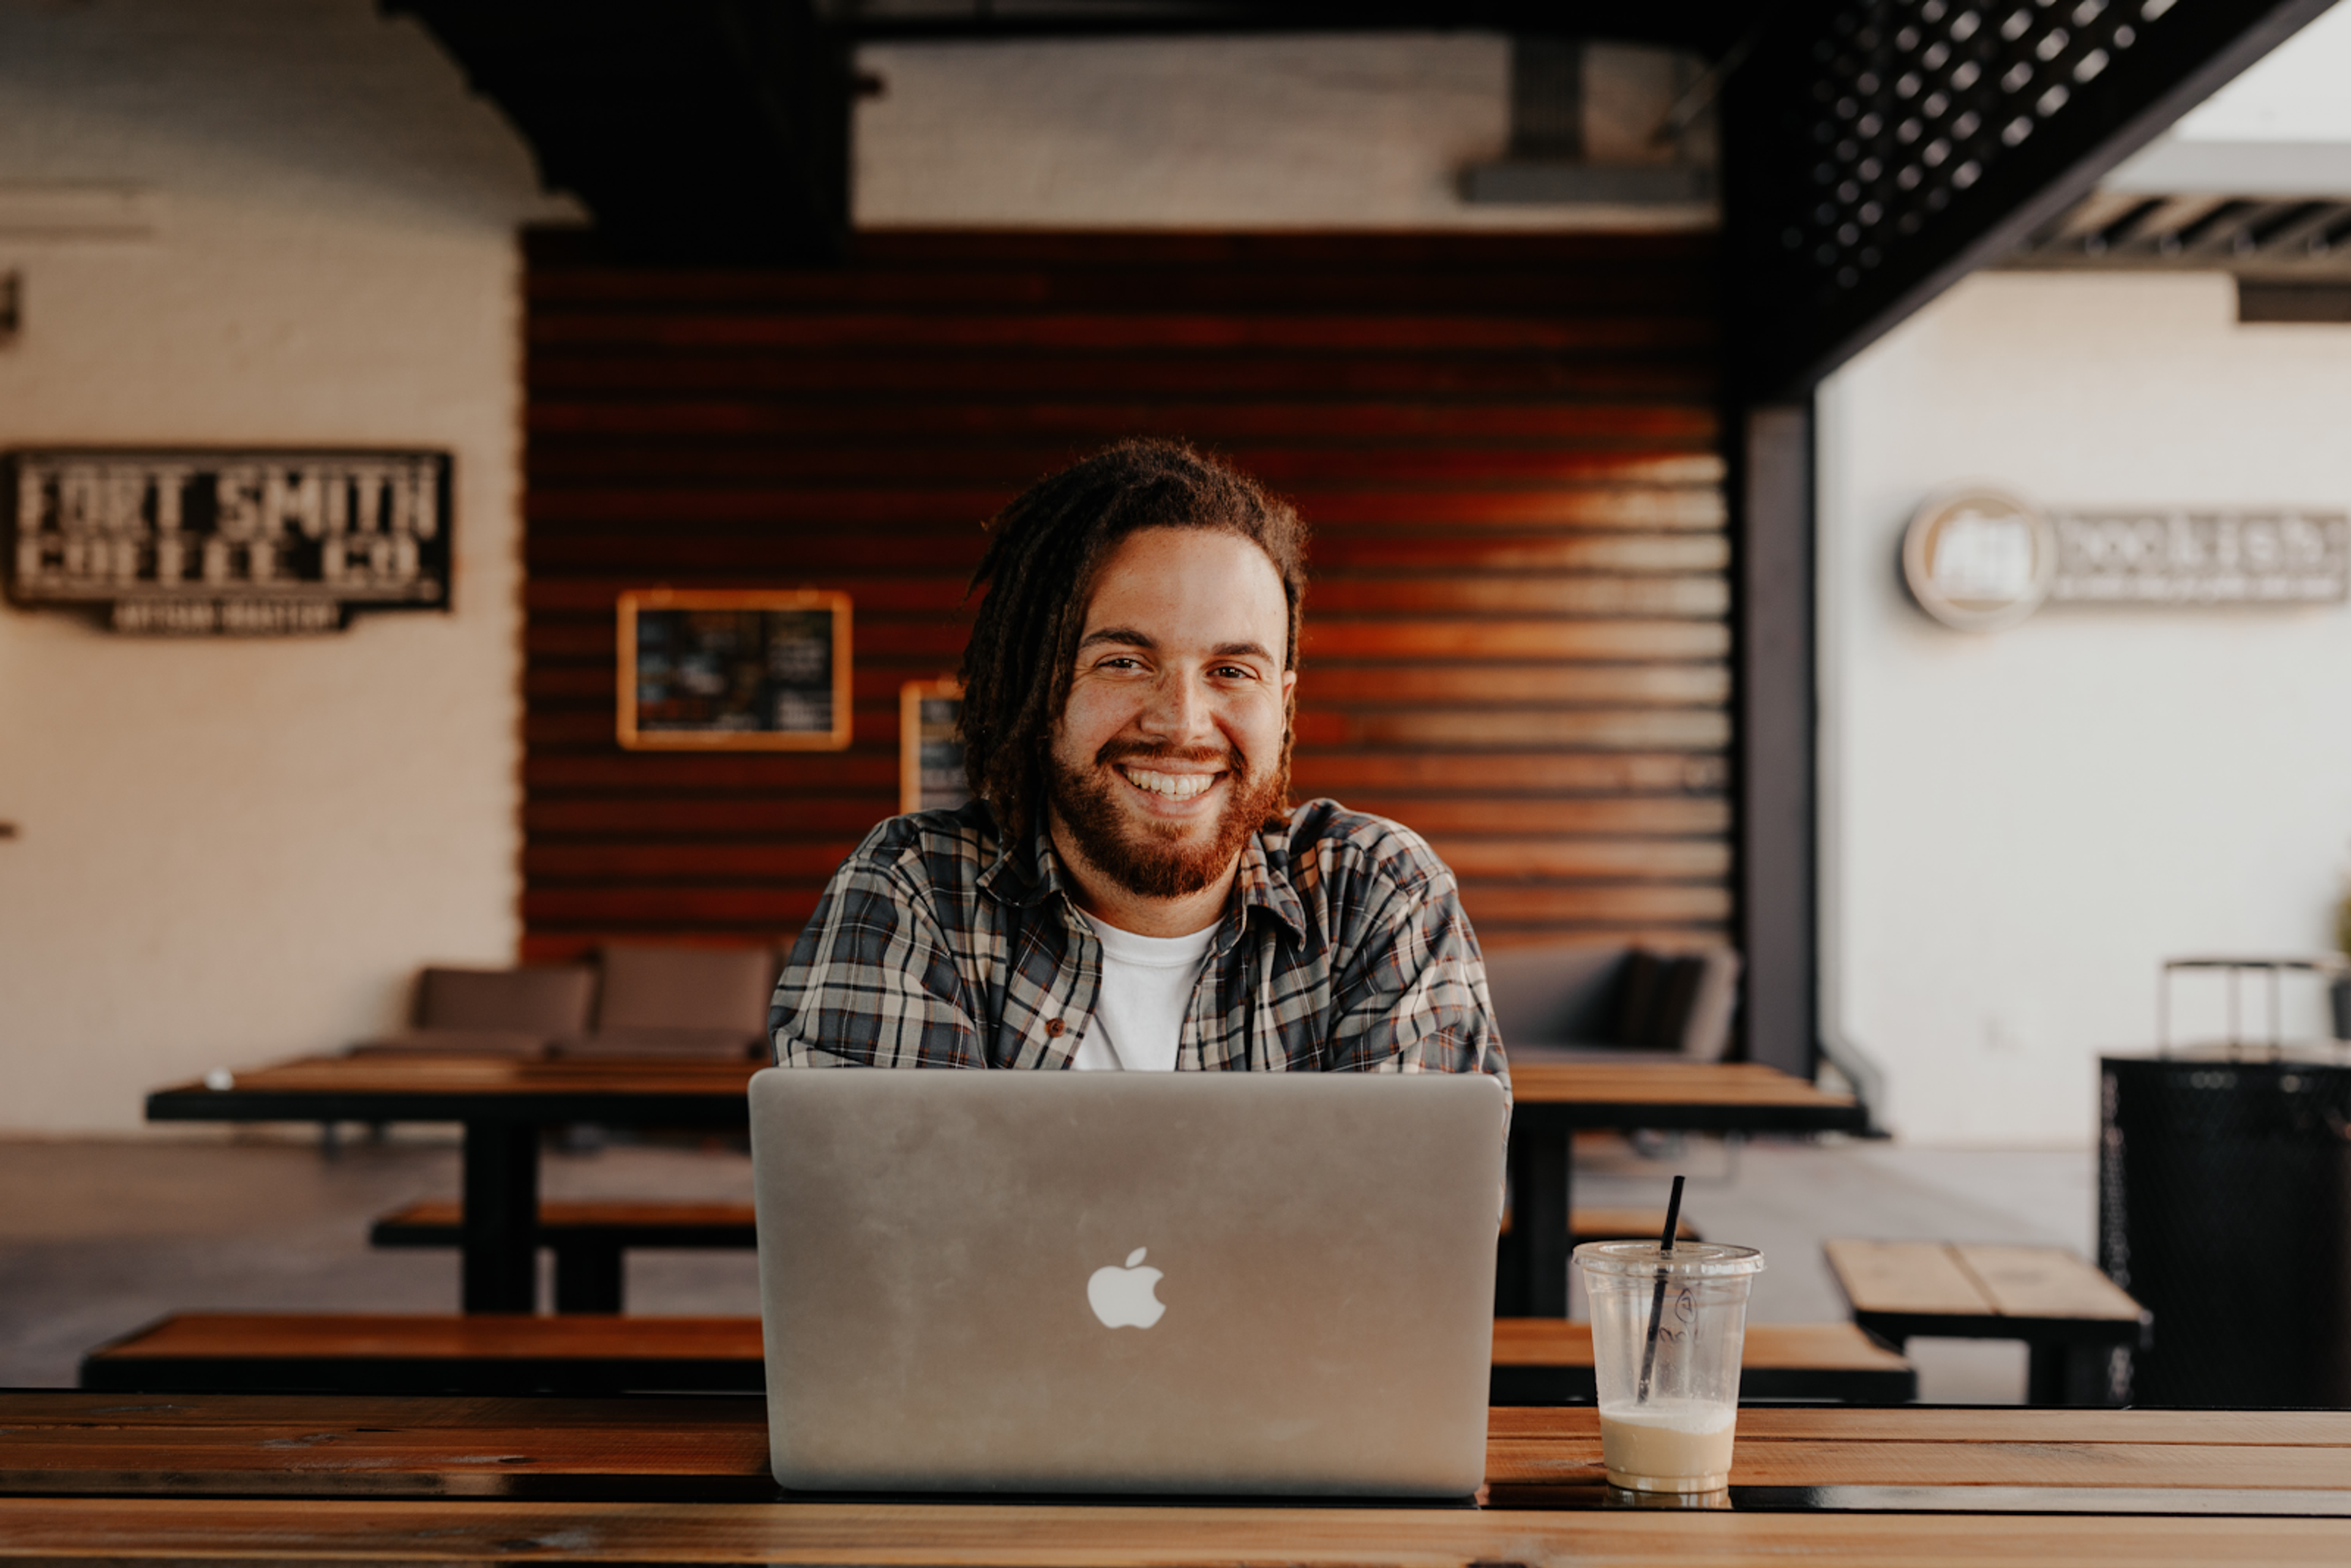 A smiling man using a laptop and drinking coffee